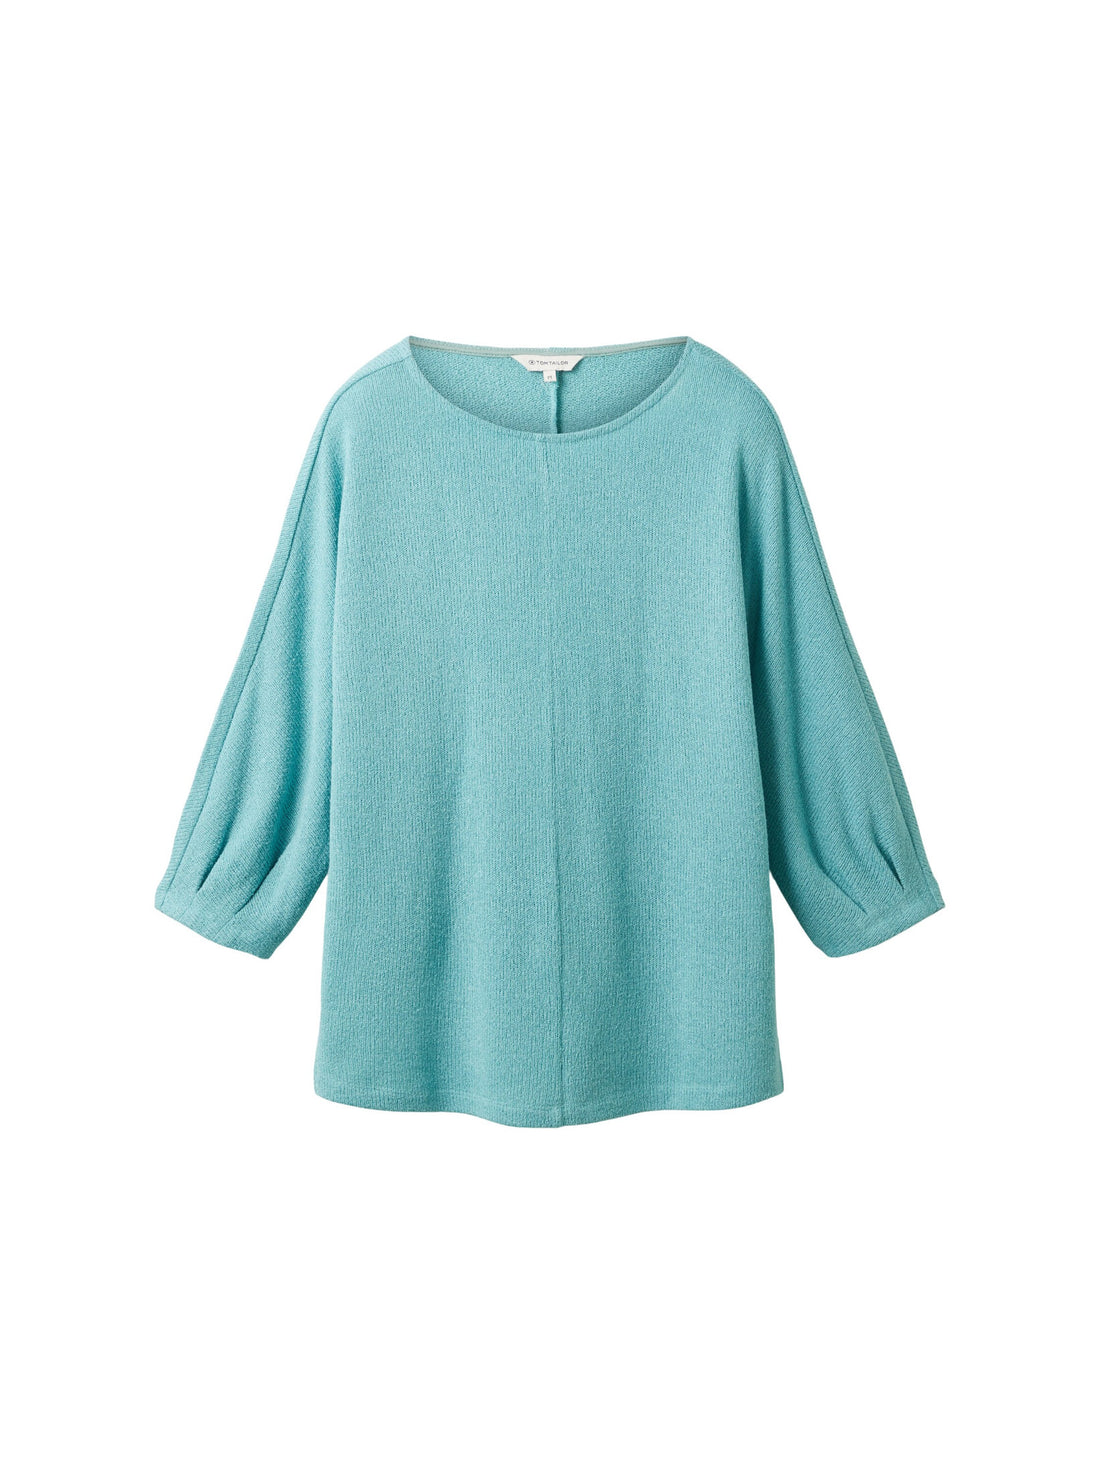 Cropped Blouse With 3/4 Sleeve_1038725_10426_01